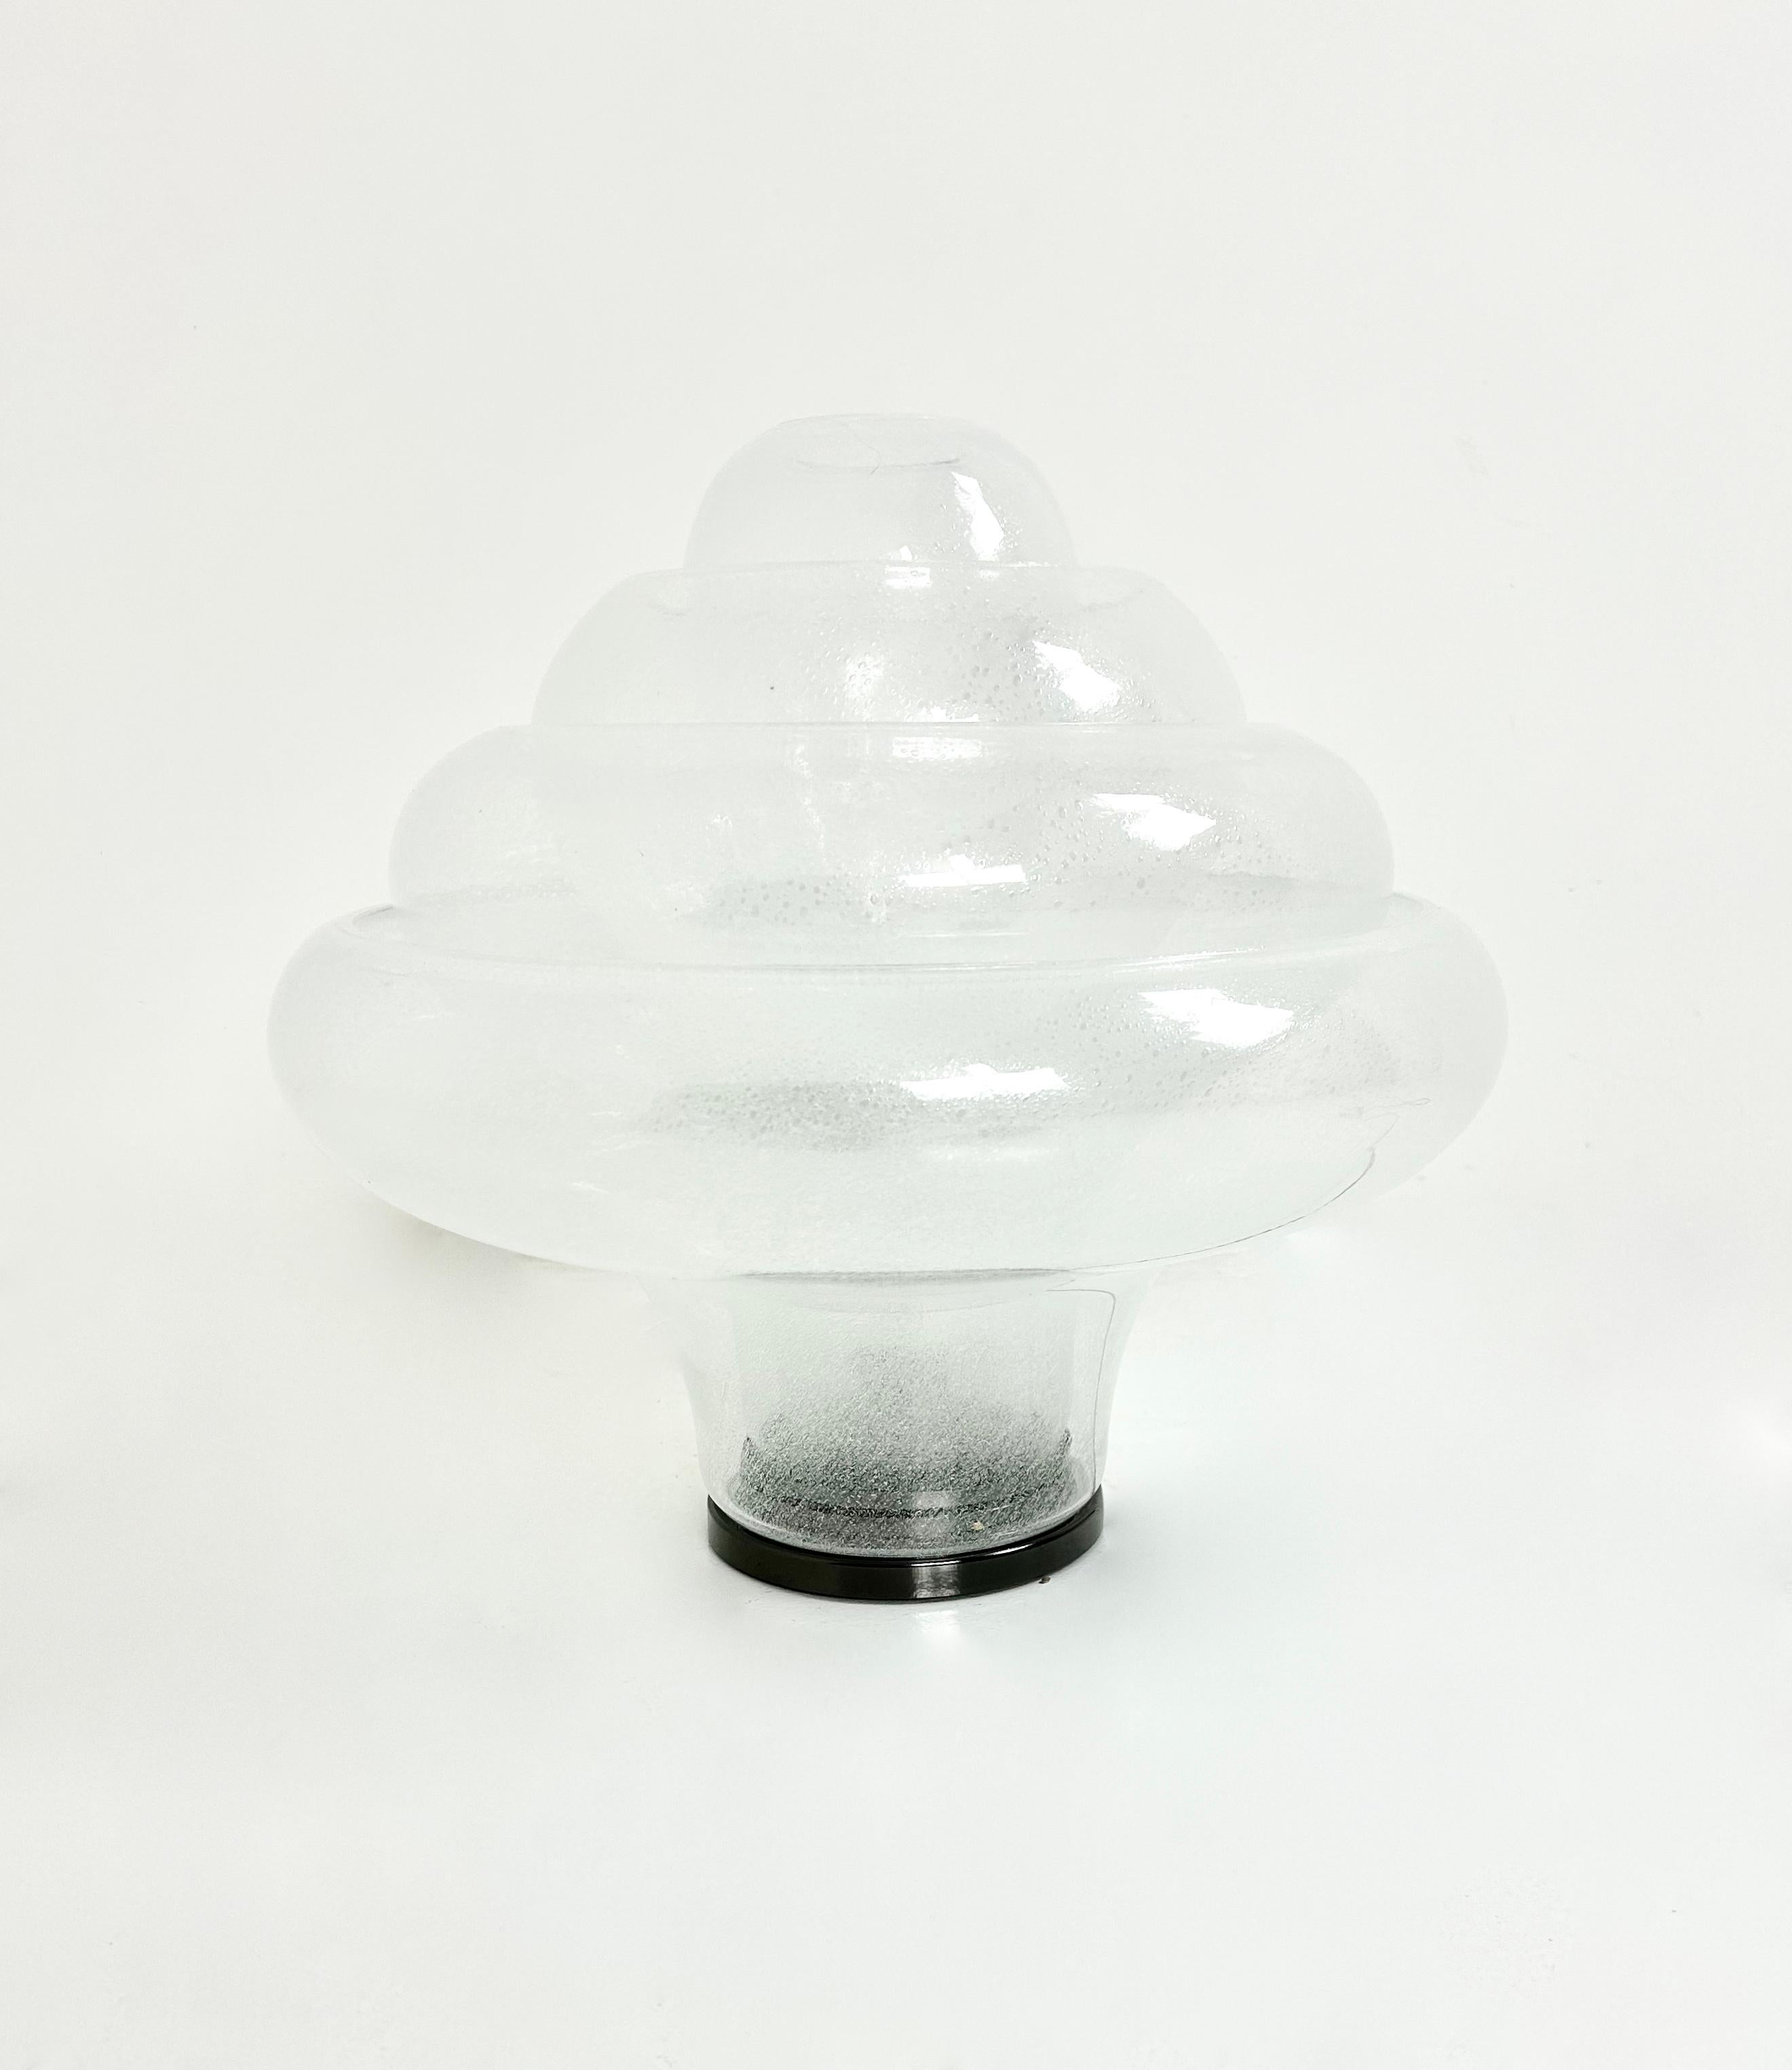 Metal LT305 Lotus table lamp by Carlo Nason for Mazzega, 1960s For Sale